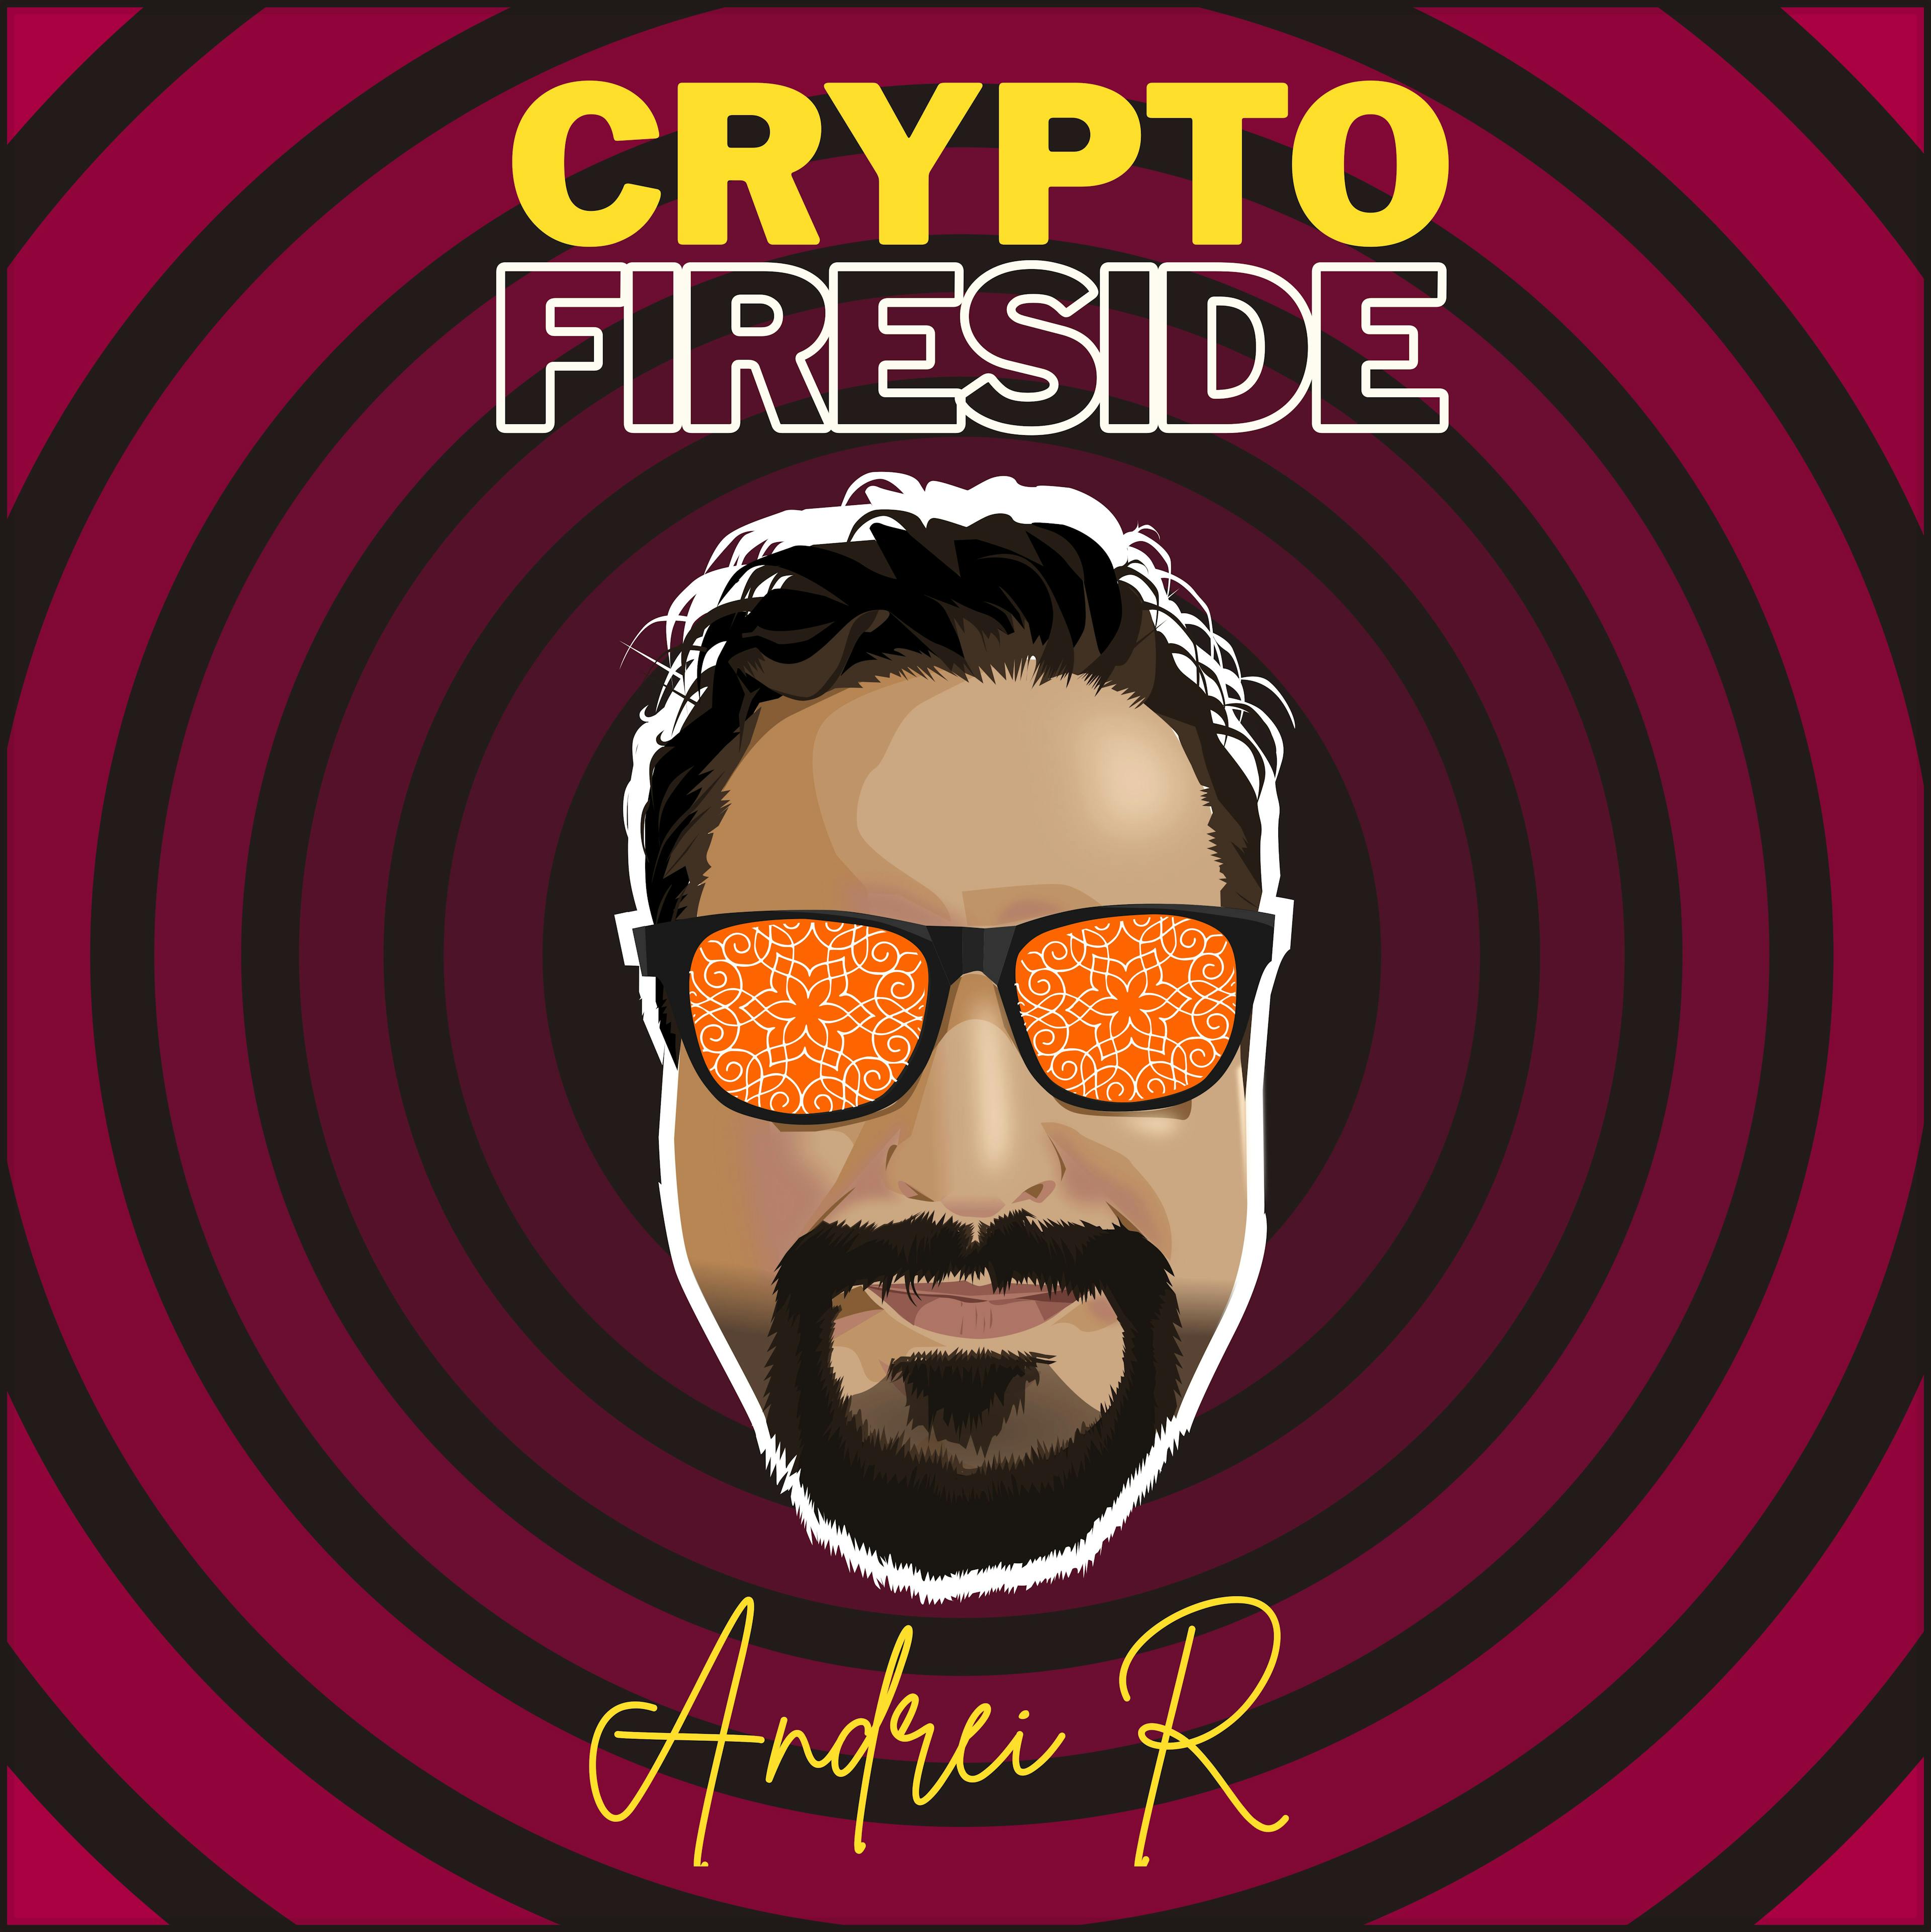 featured image - "Time is the Great Equaliser" Meet the Writer Andrei Rotariu AKA Crypto Fireside